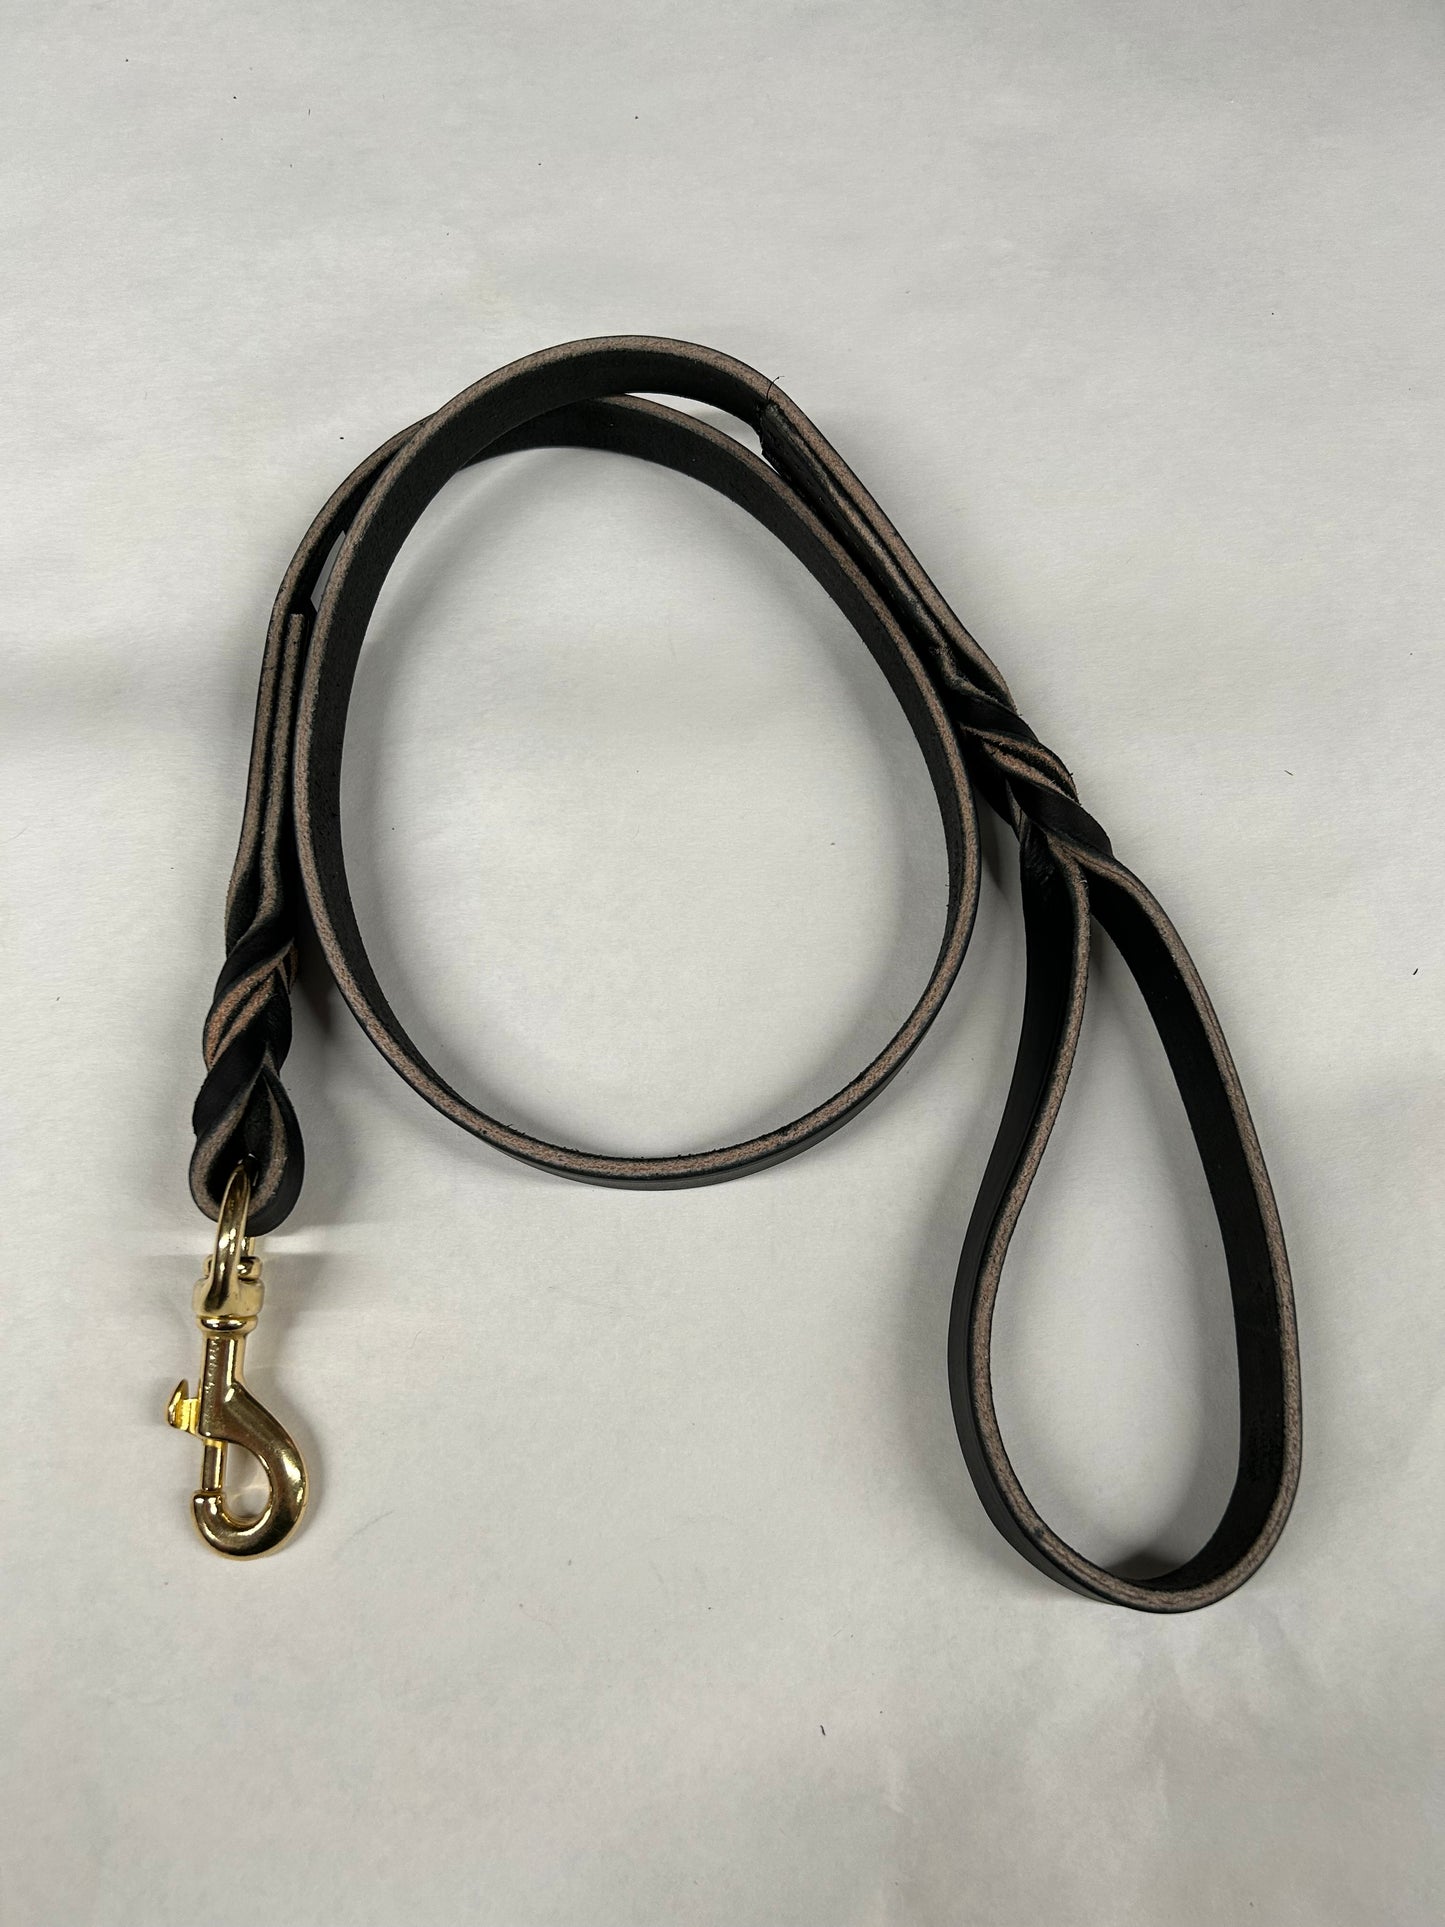 4ft x 3/8in braided leather leash (black)